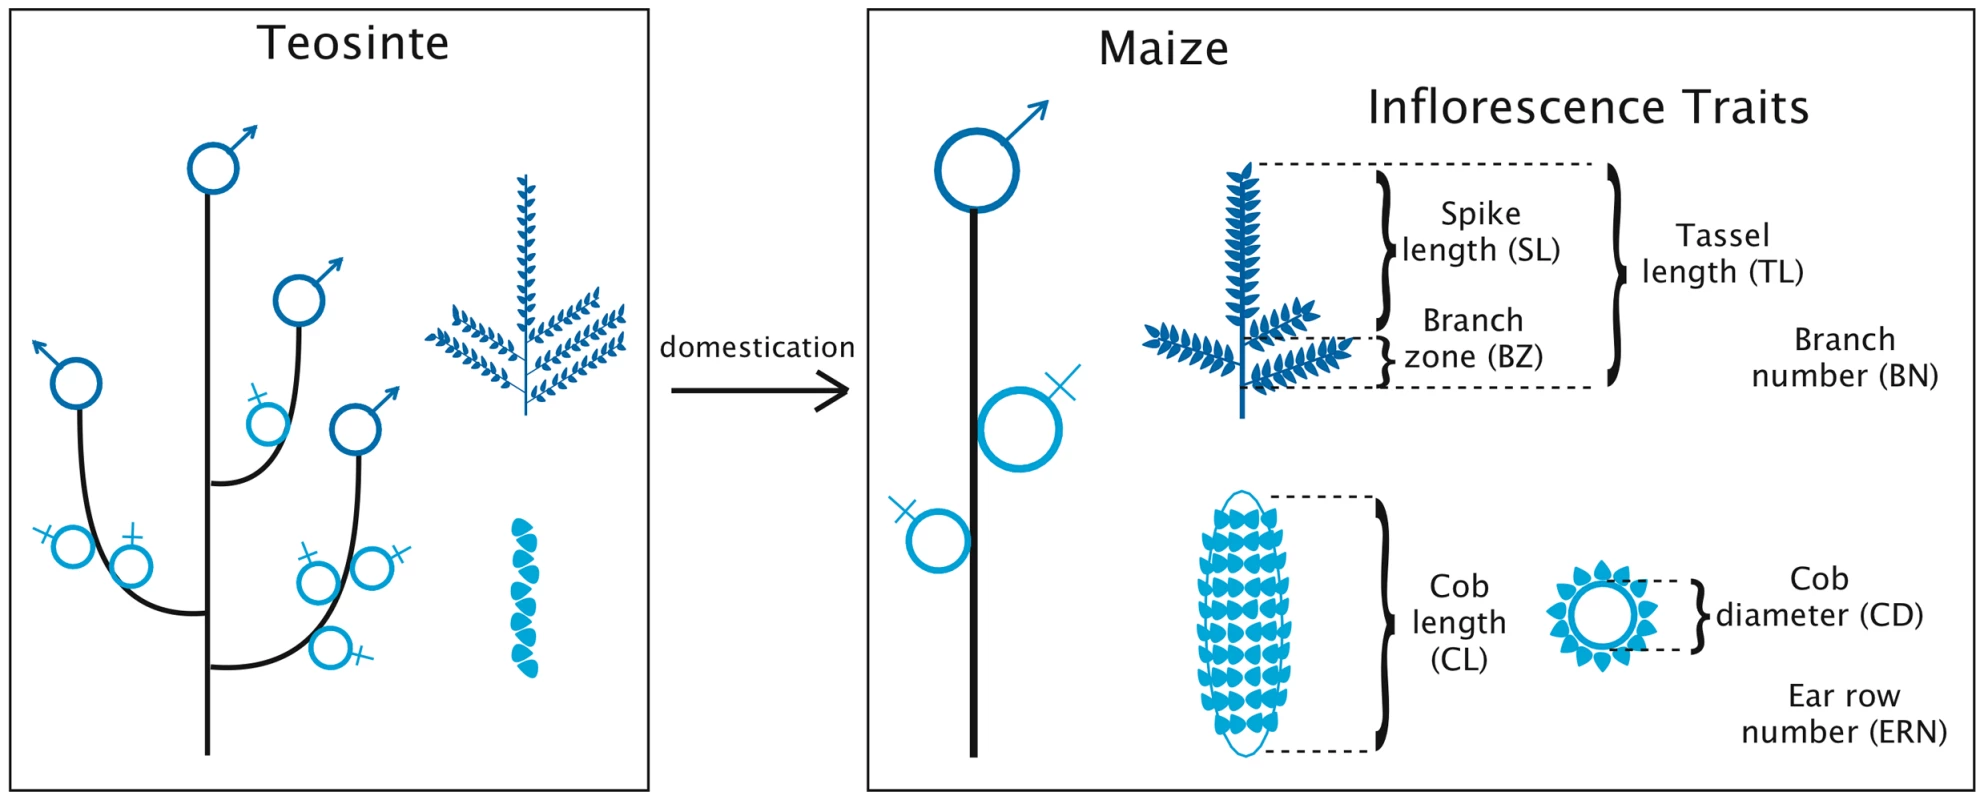 Evolution of plant and inflorescence architecture during maize domestication.